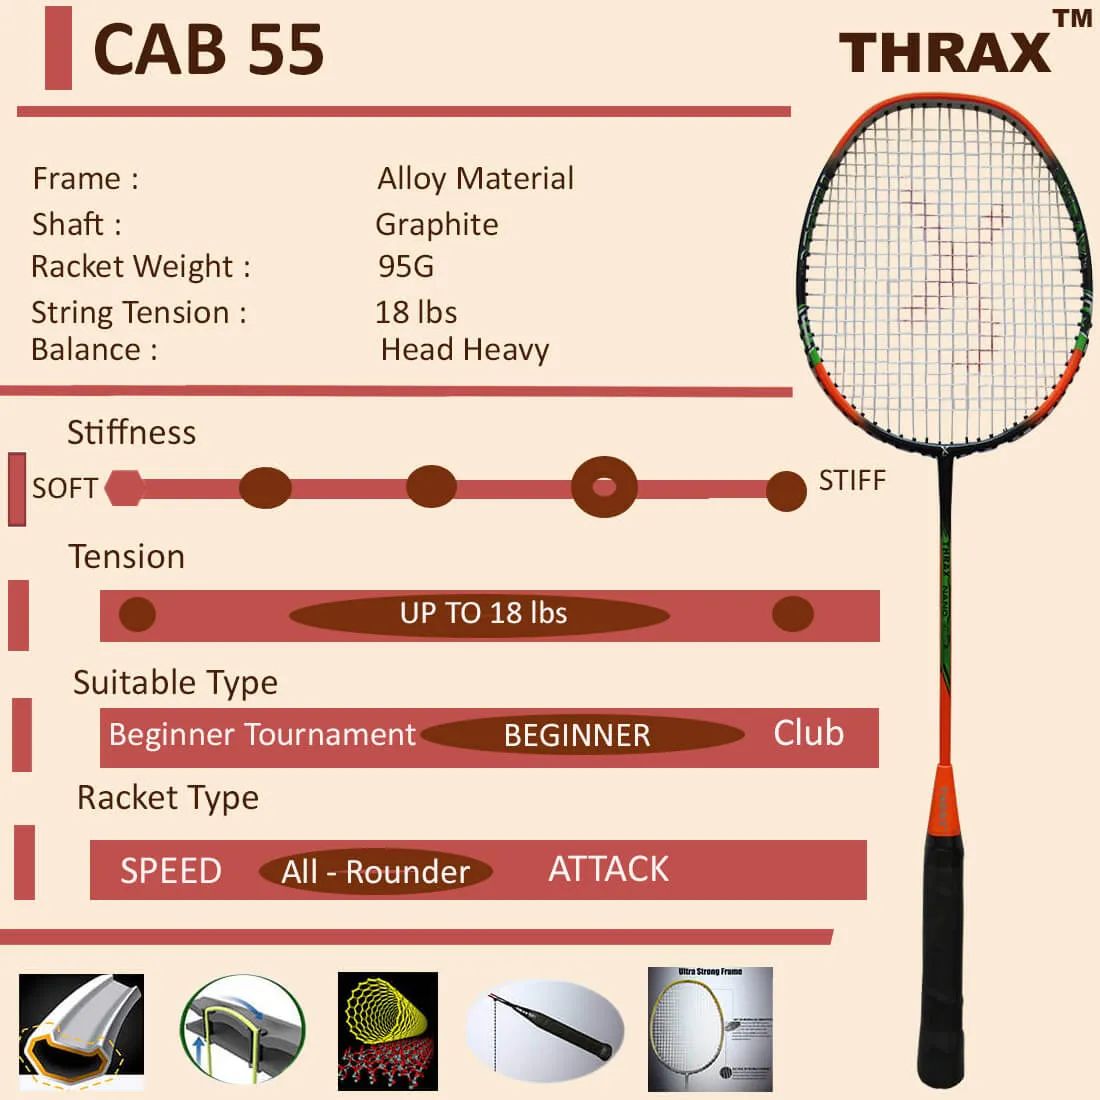 Thrax_CAB_55_Badminton_Racket_Technical_Specification